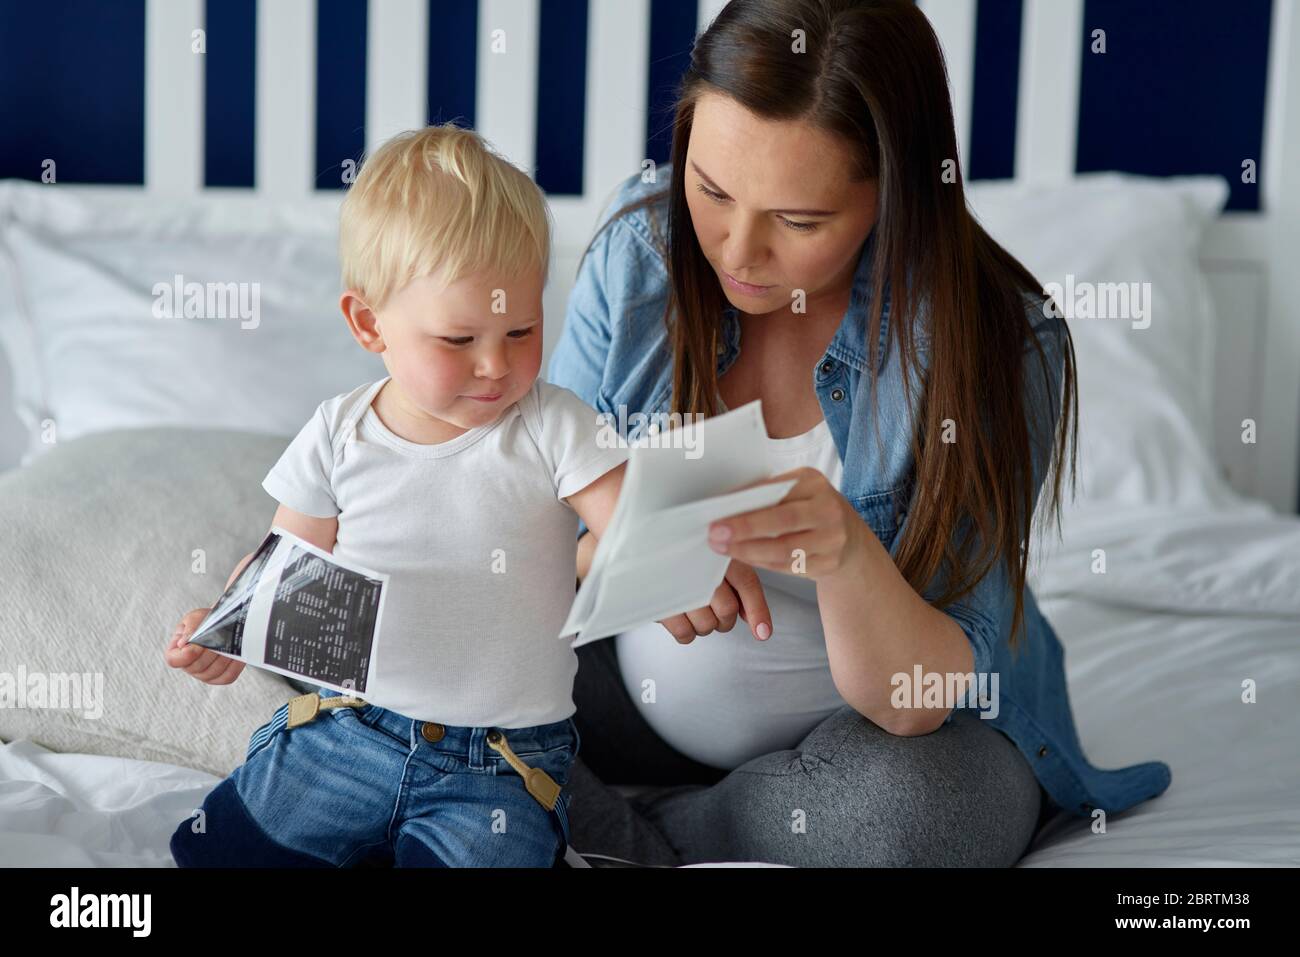 Pregnant woman browsing ultrasound images with her offspring Stock Photo